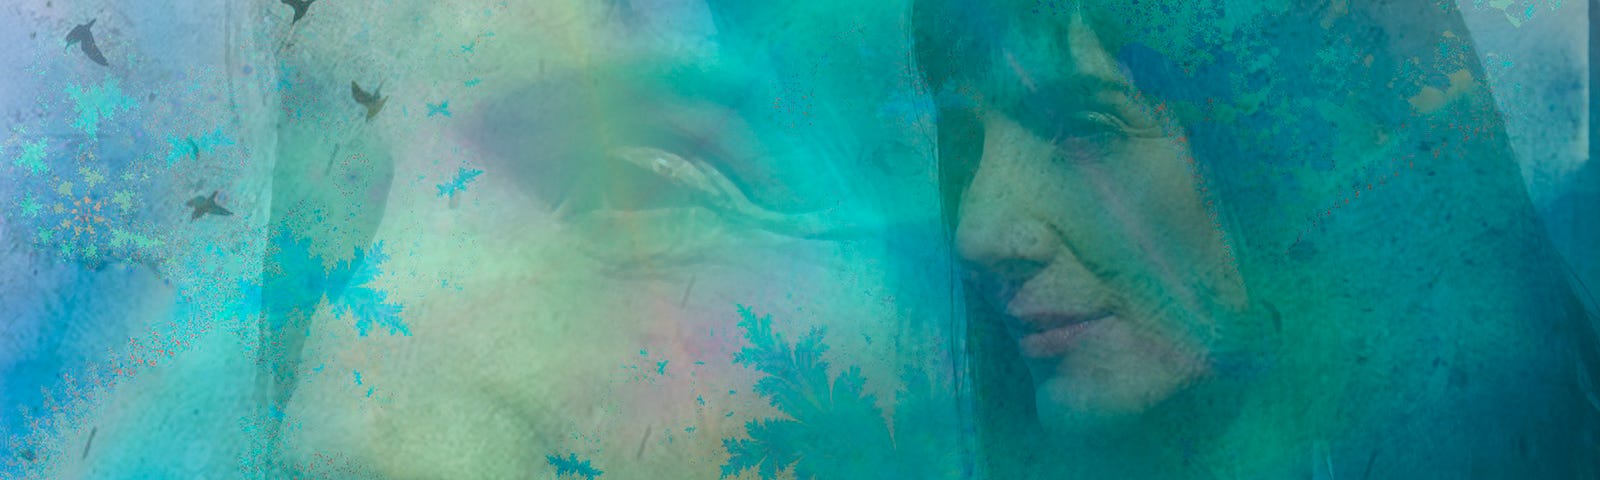 Composite image including a woman’s profile, seabirds and fractal colors in blues and greens.